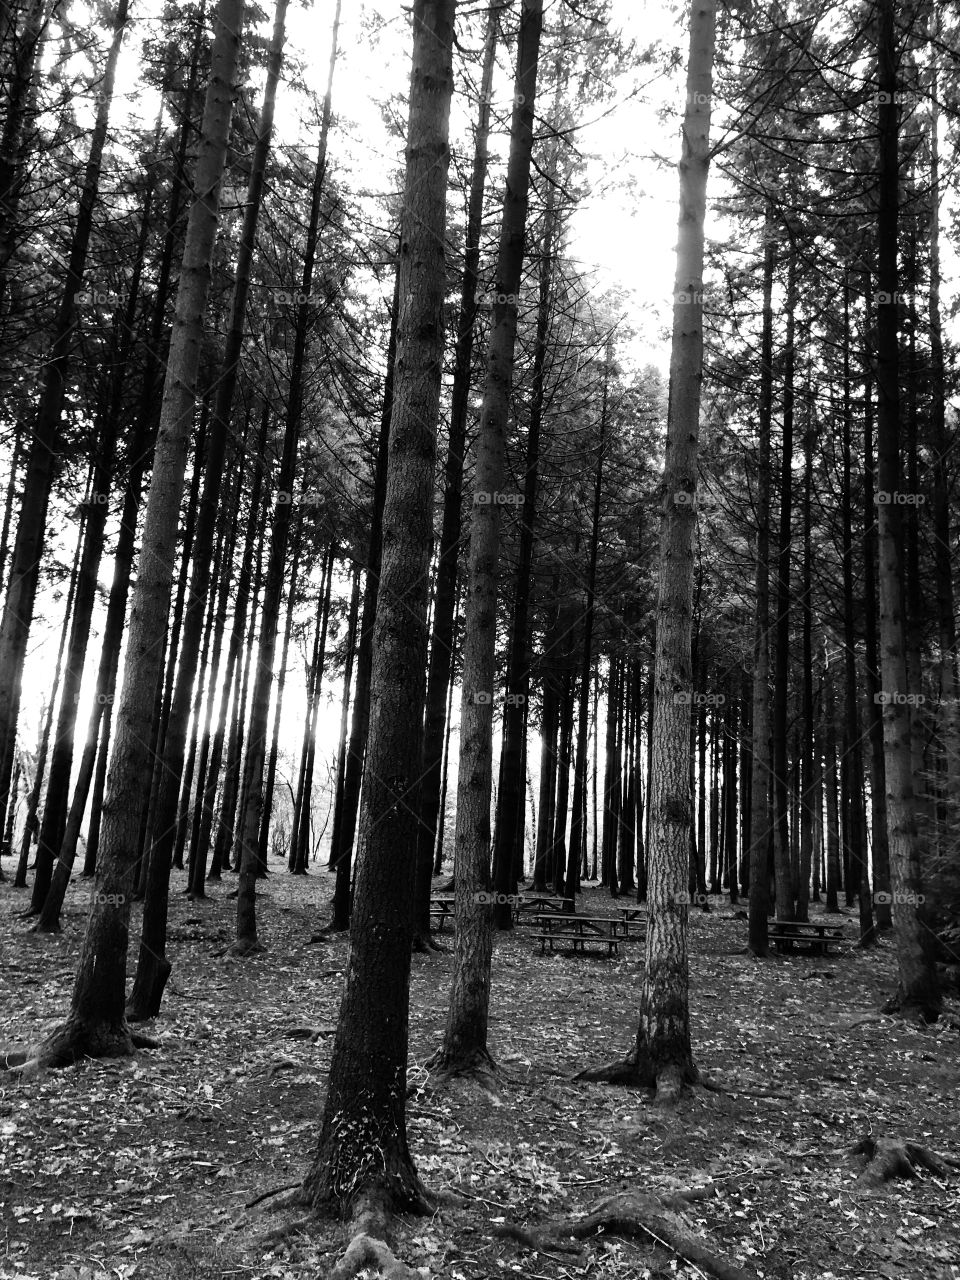 There is nothing like a huge intake of mature forestry, but in black and white the photo becomes more edgy and sinister haha.